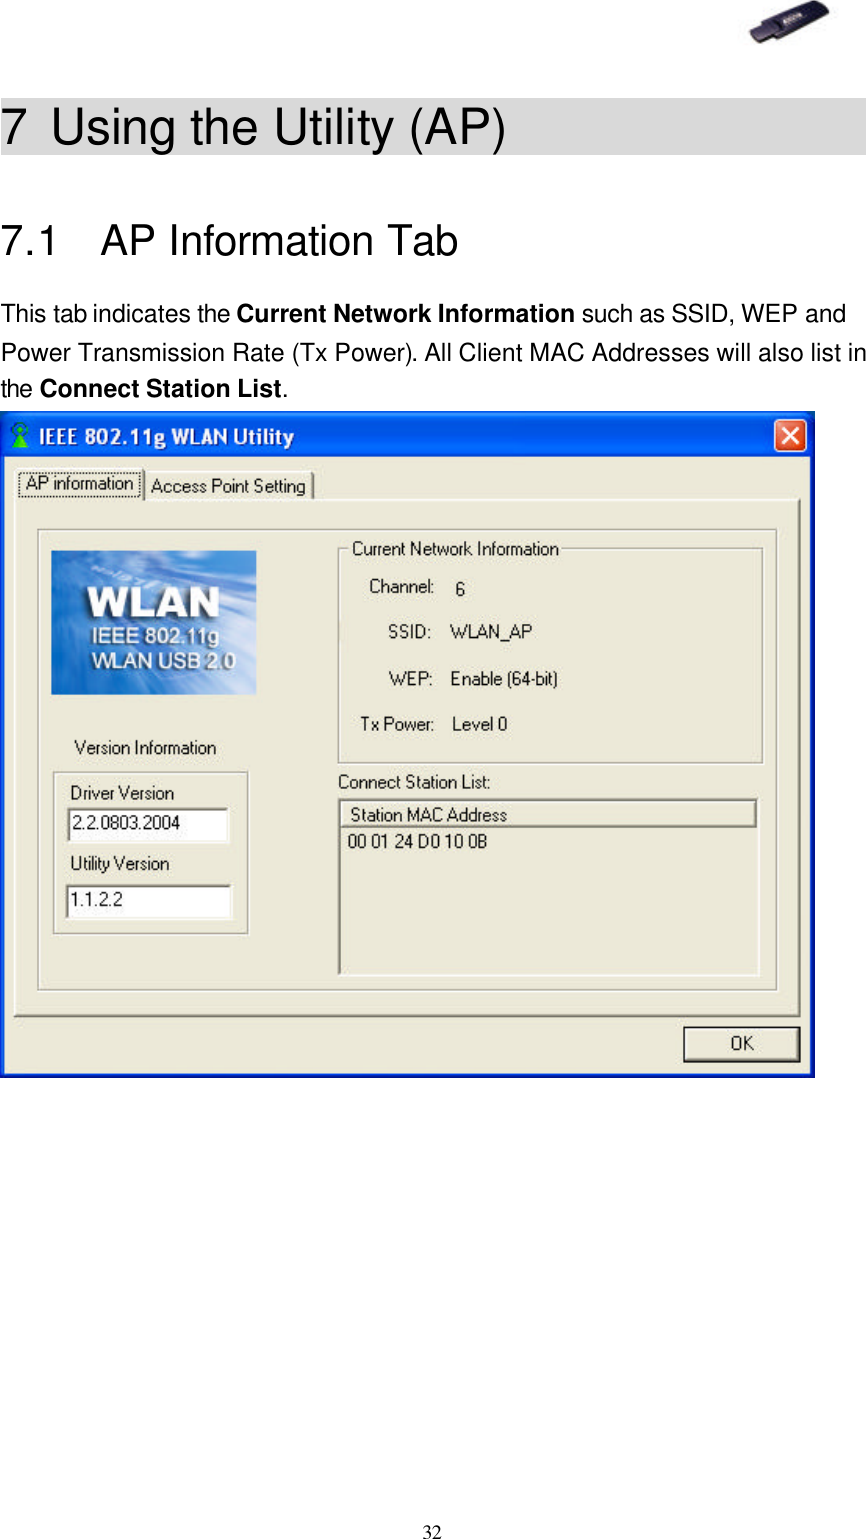   32 7 Using the Utility (AP)                 7.1 AP Information Tab This tab indicates the Current Network Information such as SSID, WEP and Power Transmission Rate (Tx Power). All Client MAC Addresses will also list in the Connect Station List.  